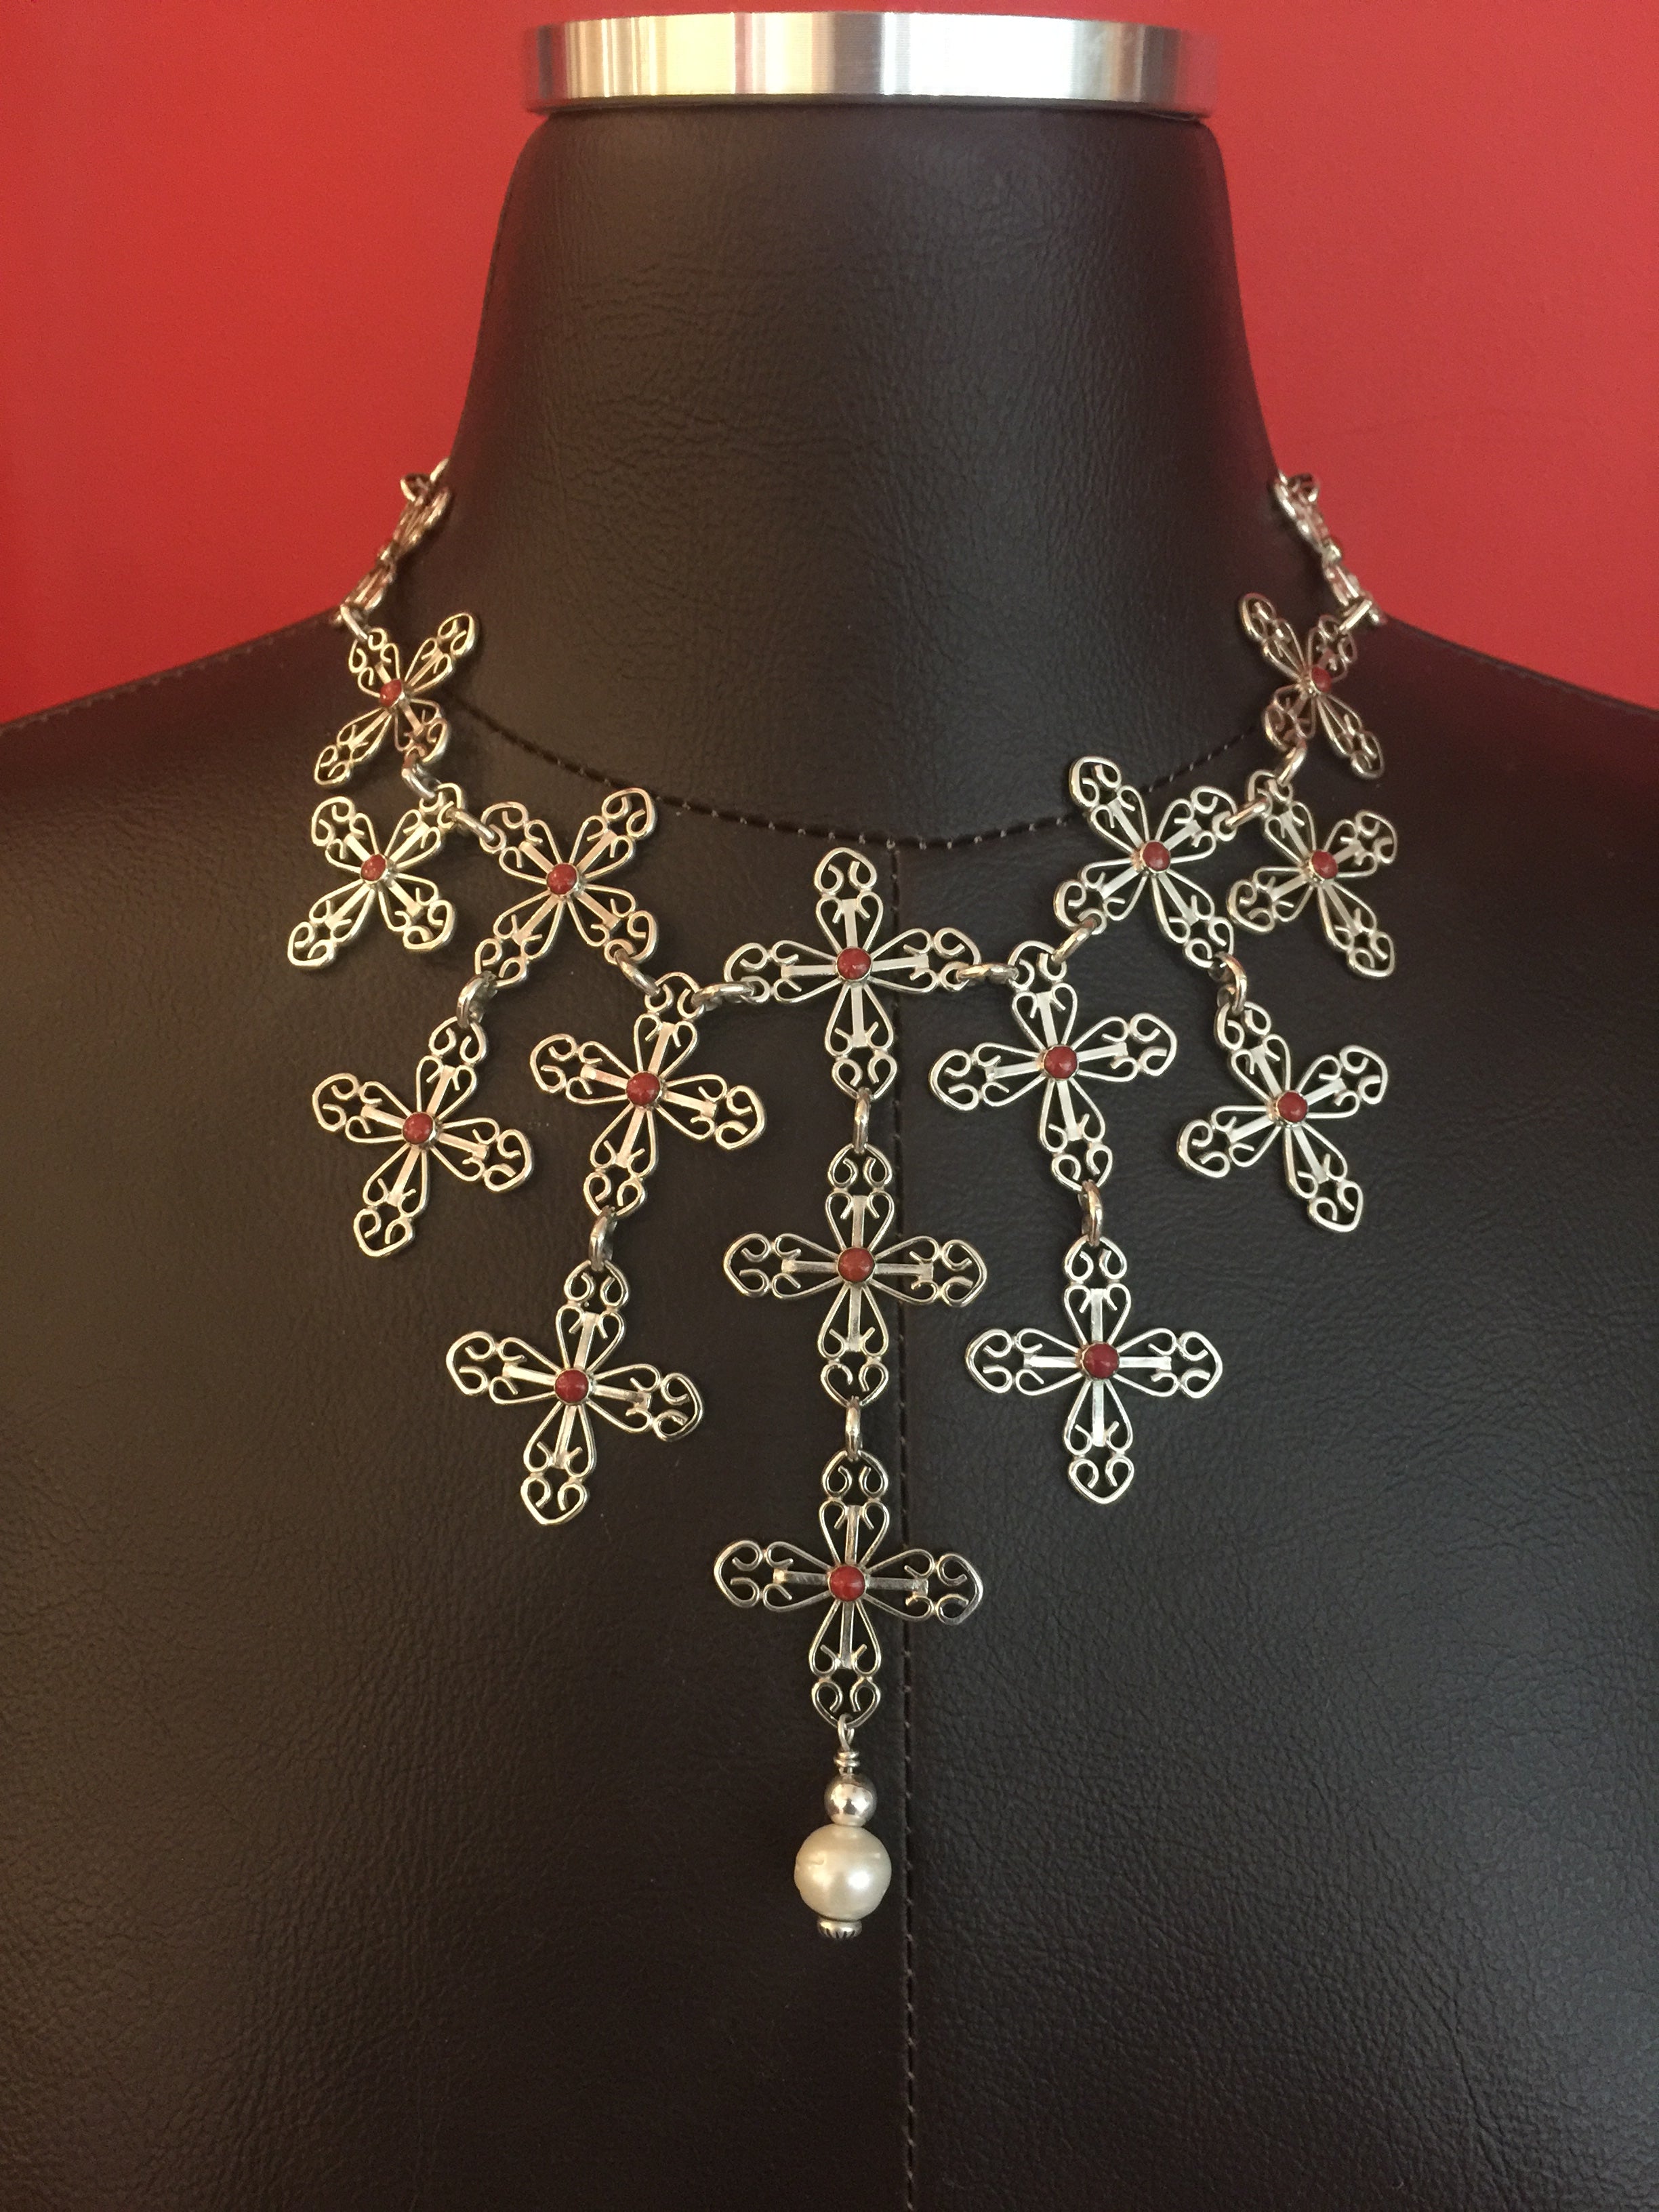 Contact to Inquire Night at the Santa Fe Opera Necklace